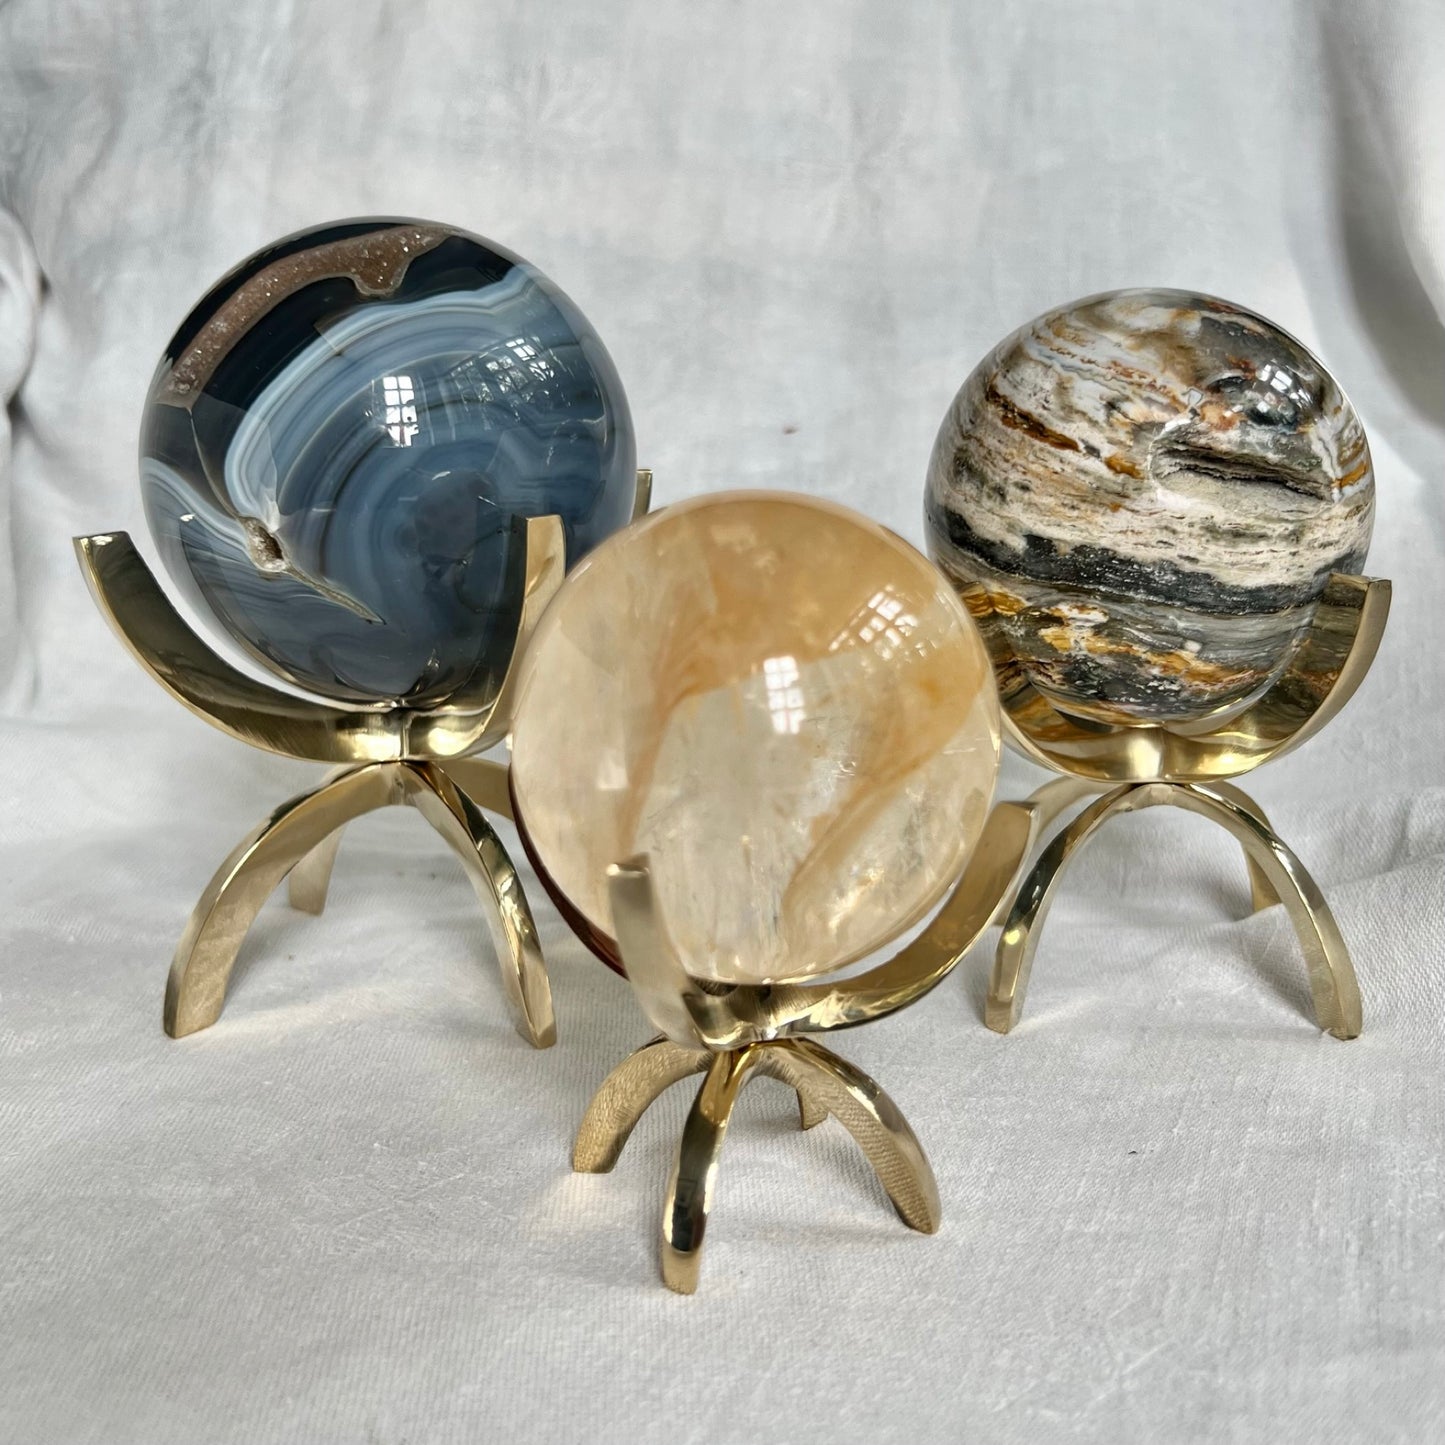 Three crystal spheres sit inside three shiny brass display stands